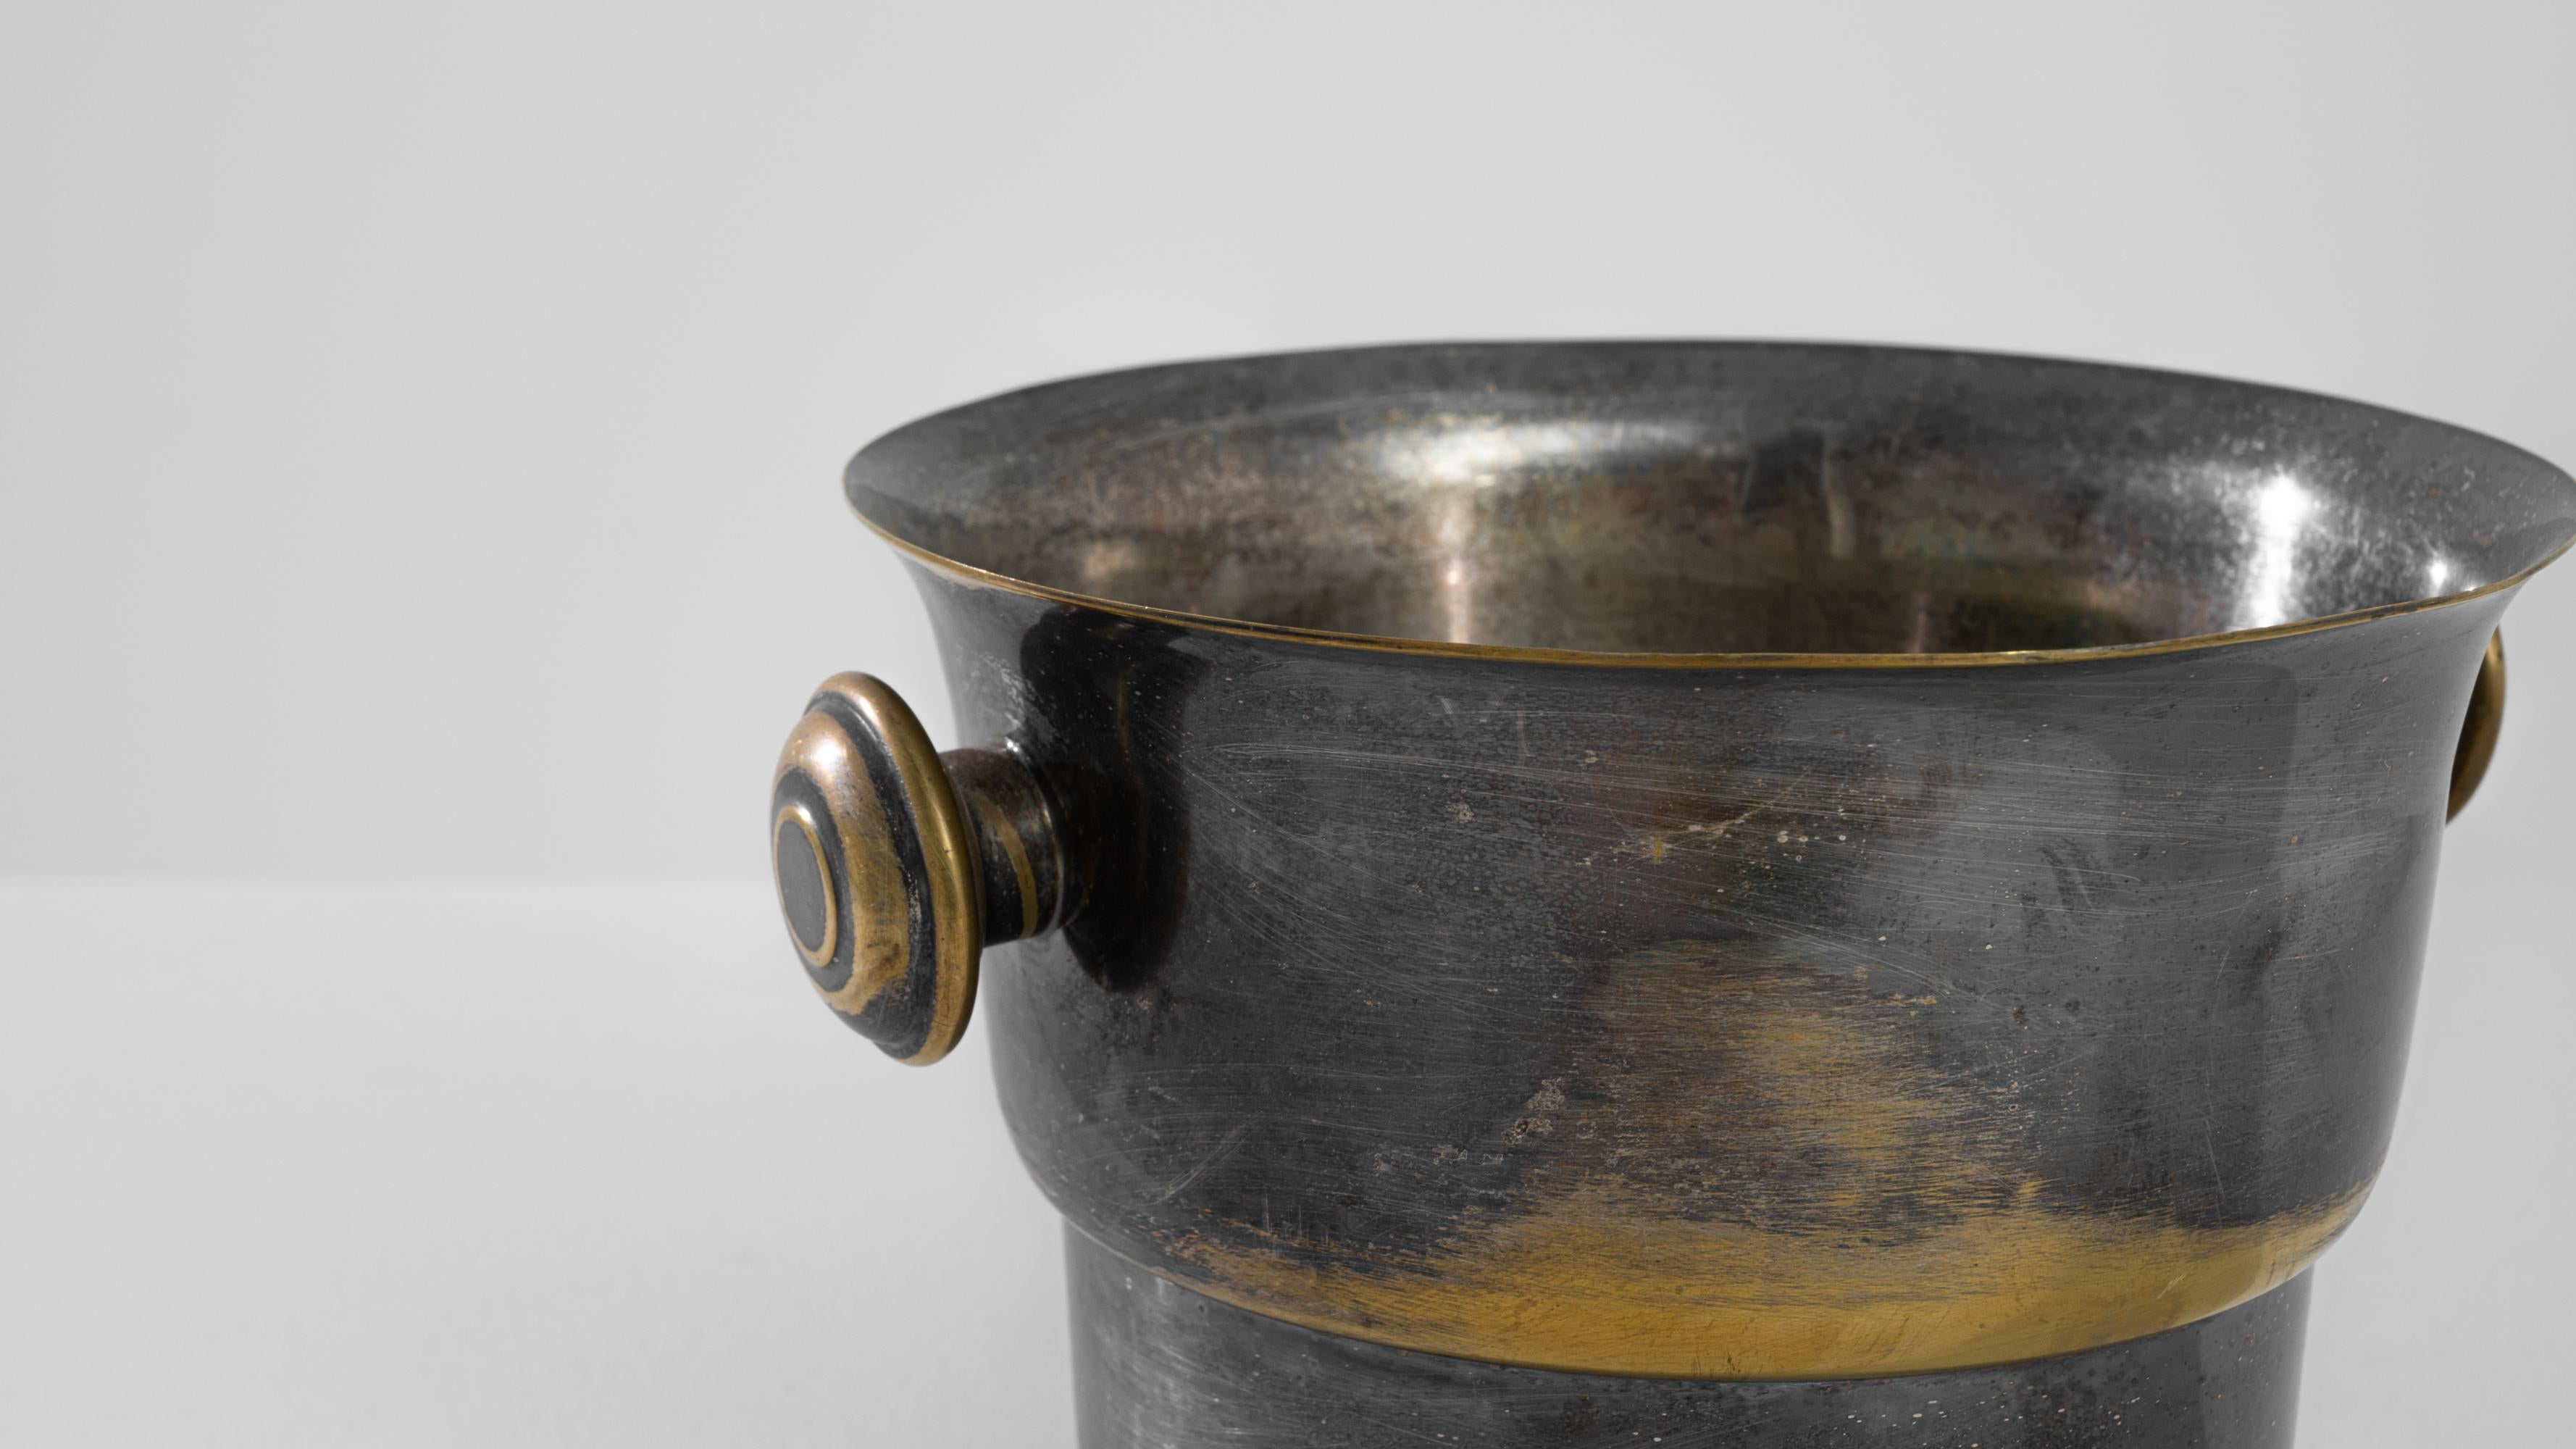 This lidless ice bucket was made in France, circa 1930. A silver plated bucket elegantly patinated to reveal its brass underlayer. The original rounded handles with concentric circles mimic the three parts shape of the bucket, unfolding like a